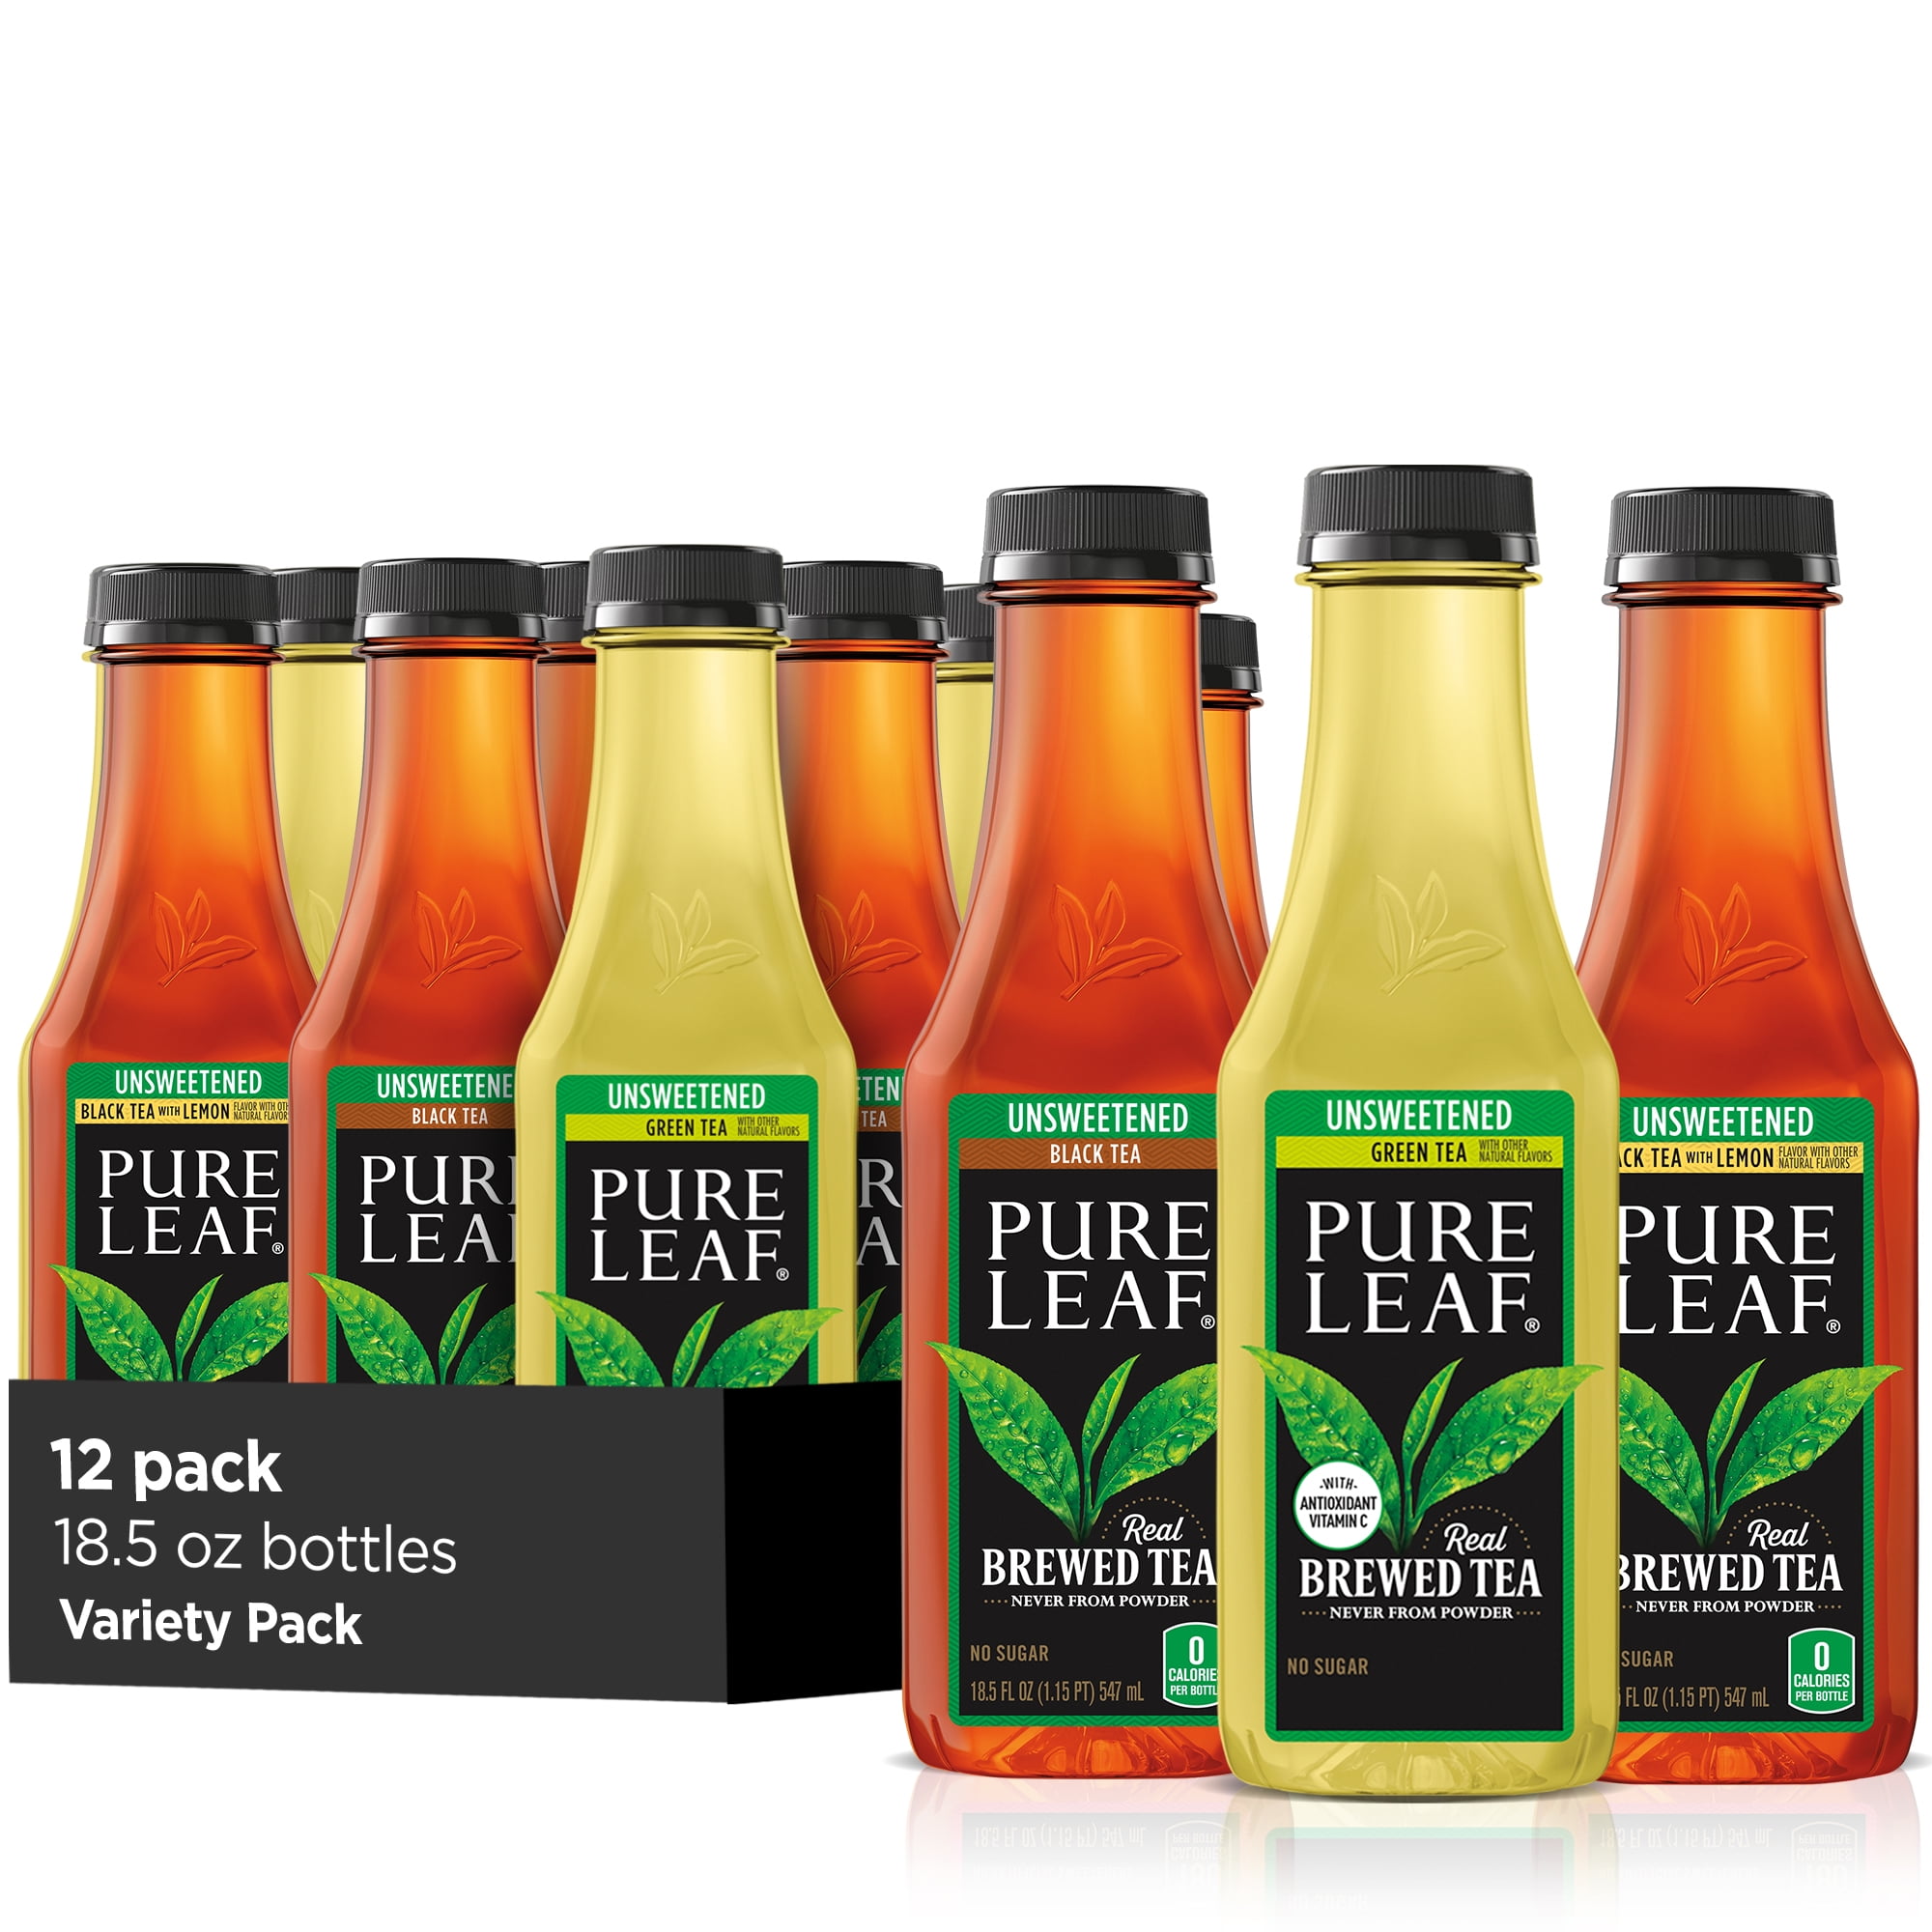 (12 Bottles) Pure Leaf Iced Tea, Unsweetened Variety Pack, 18.5 fl oz